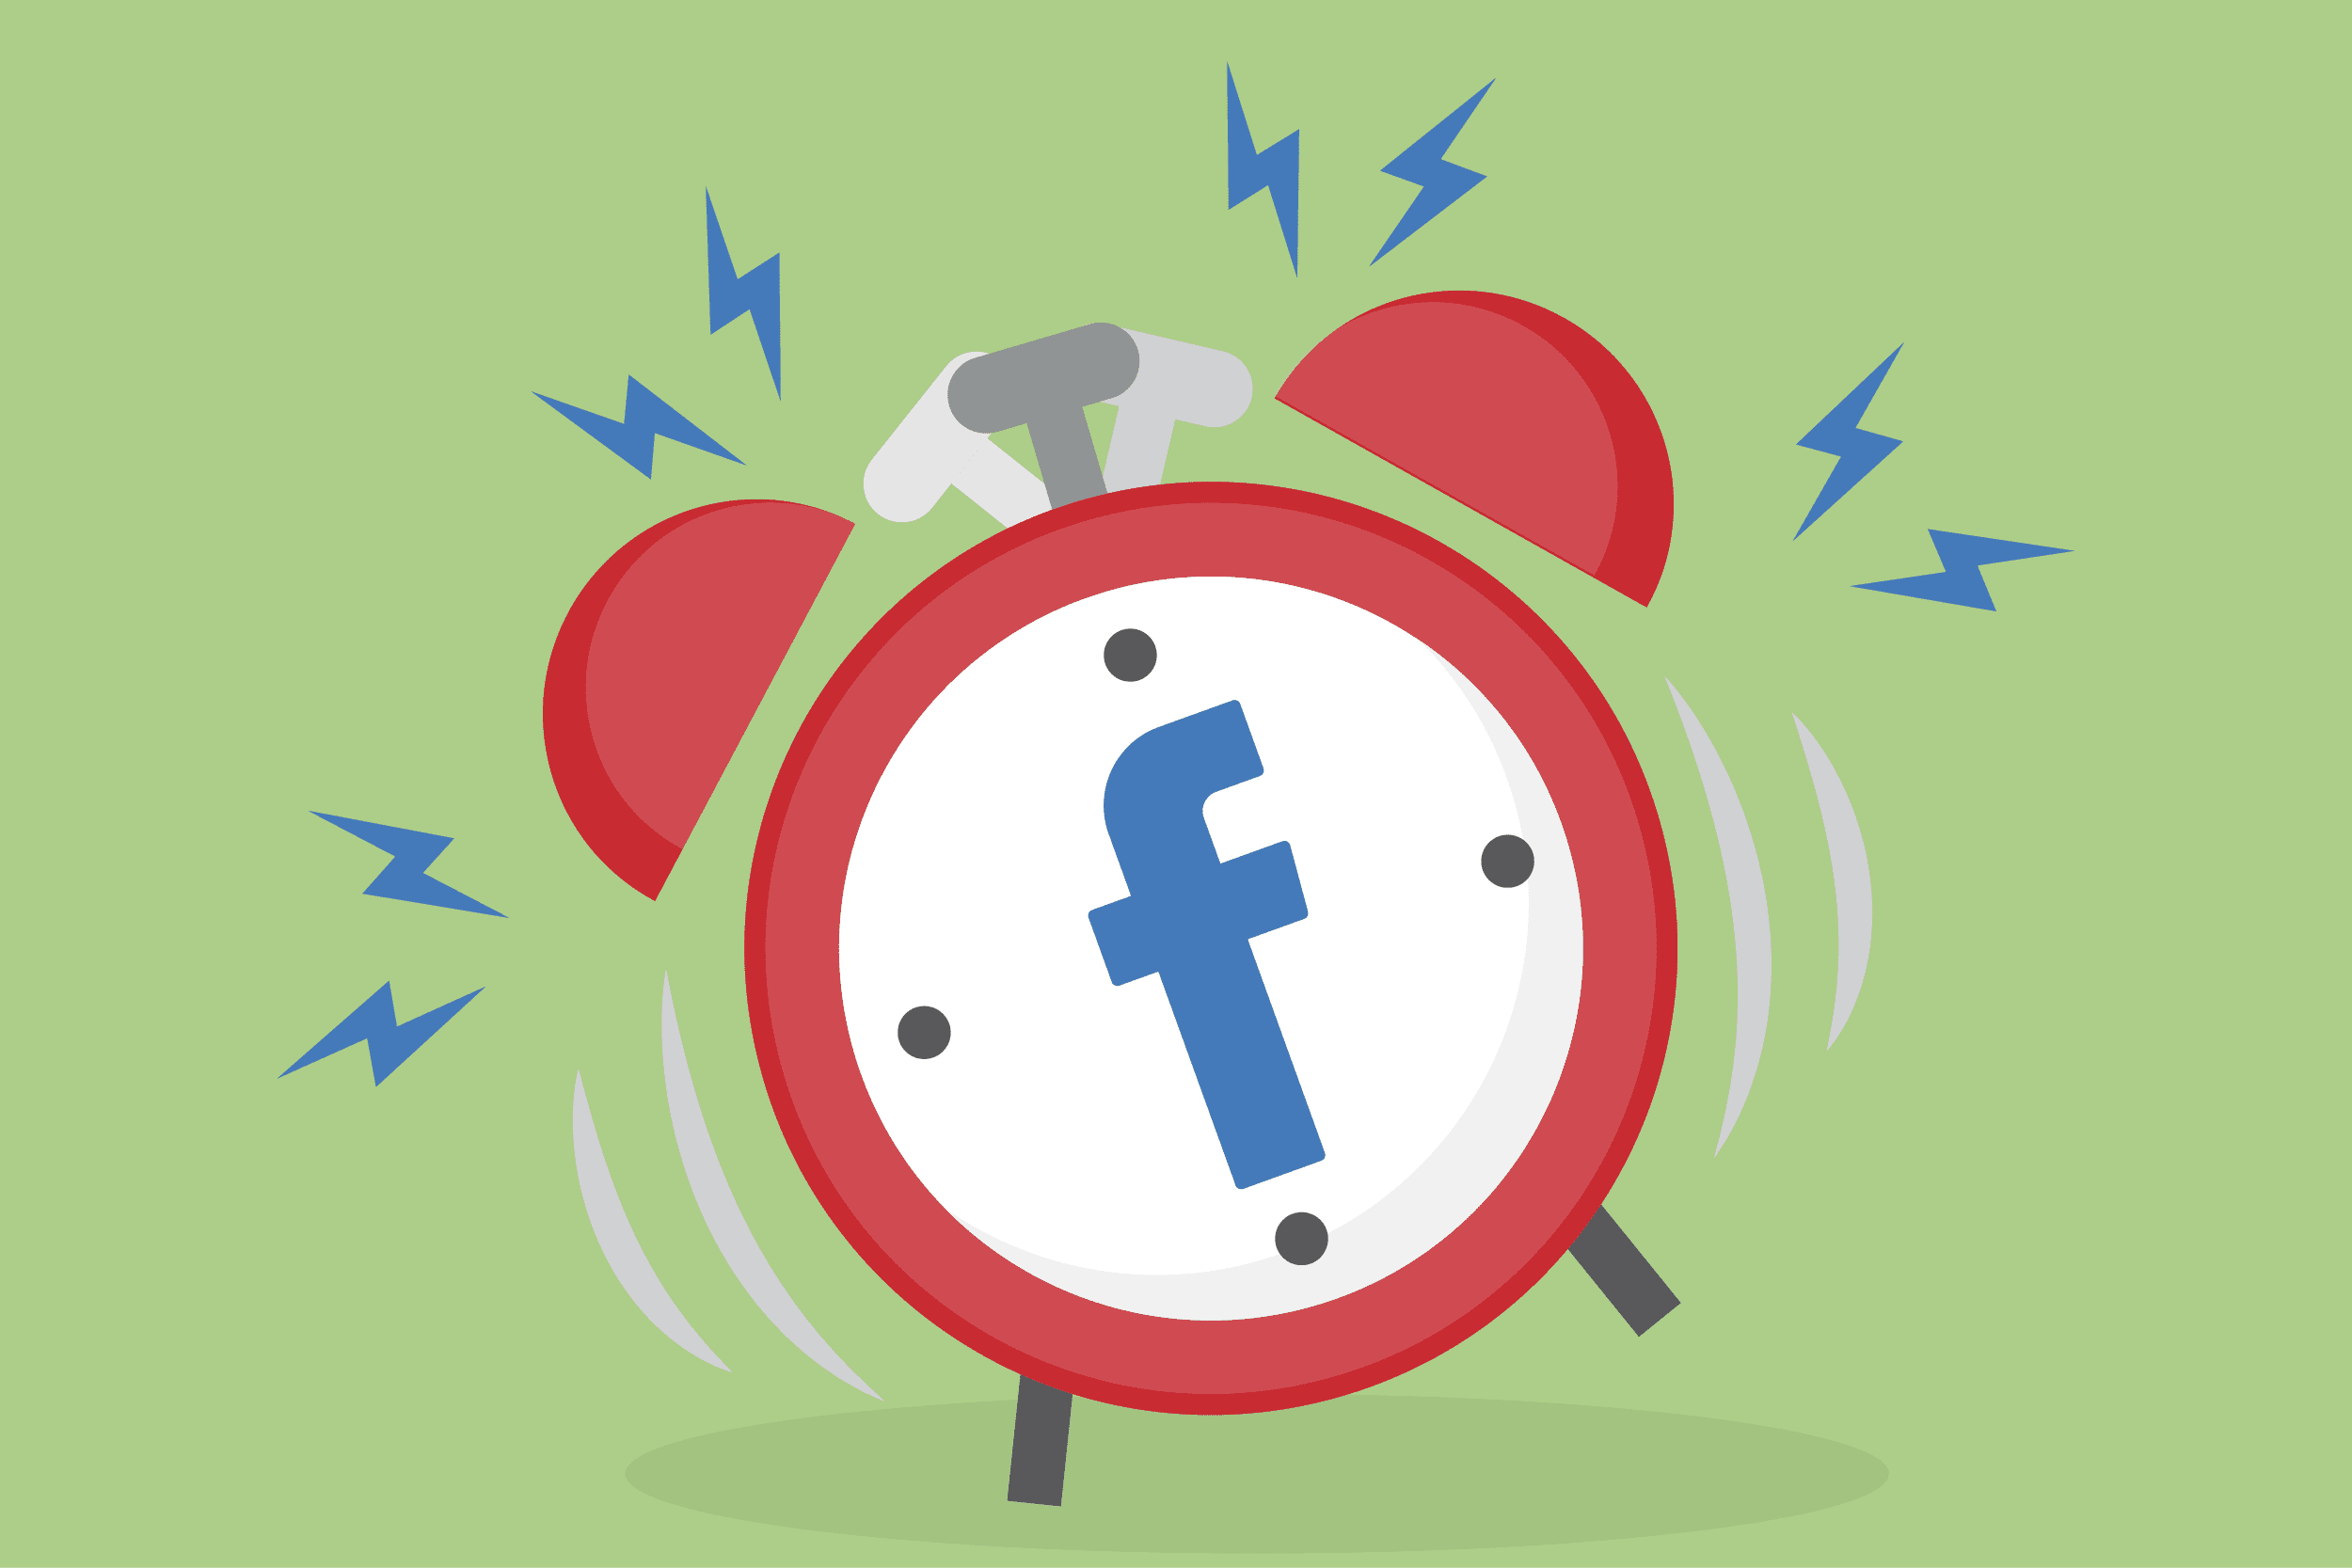 Buzzing alarm clock with Facebook logo in the middle